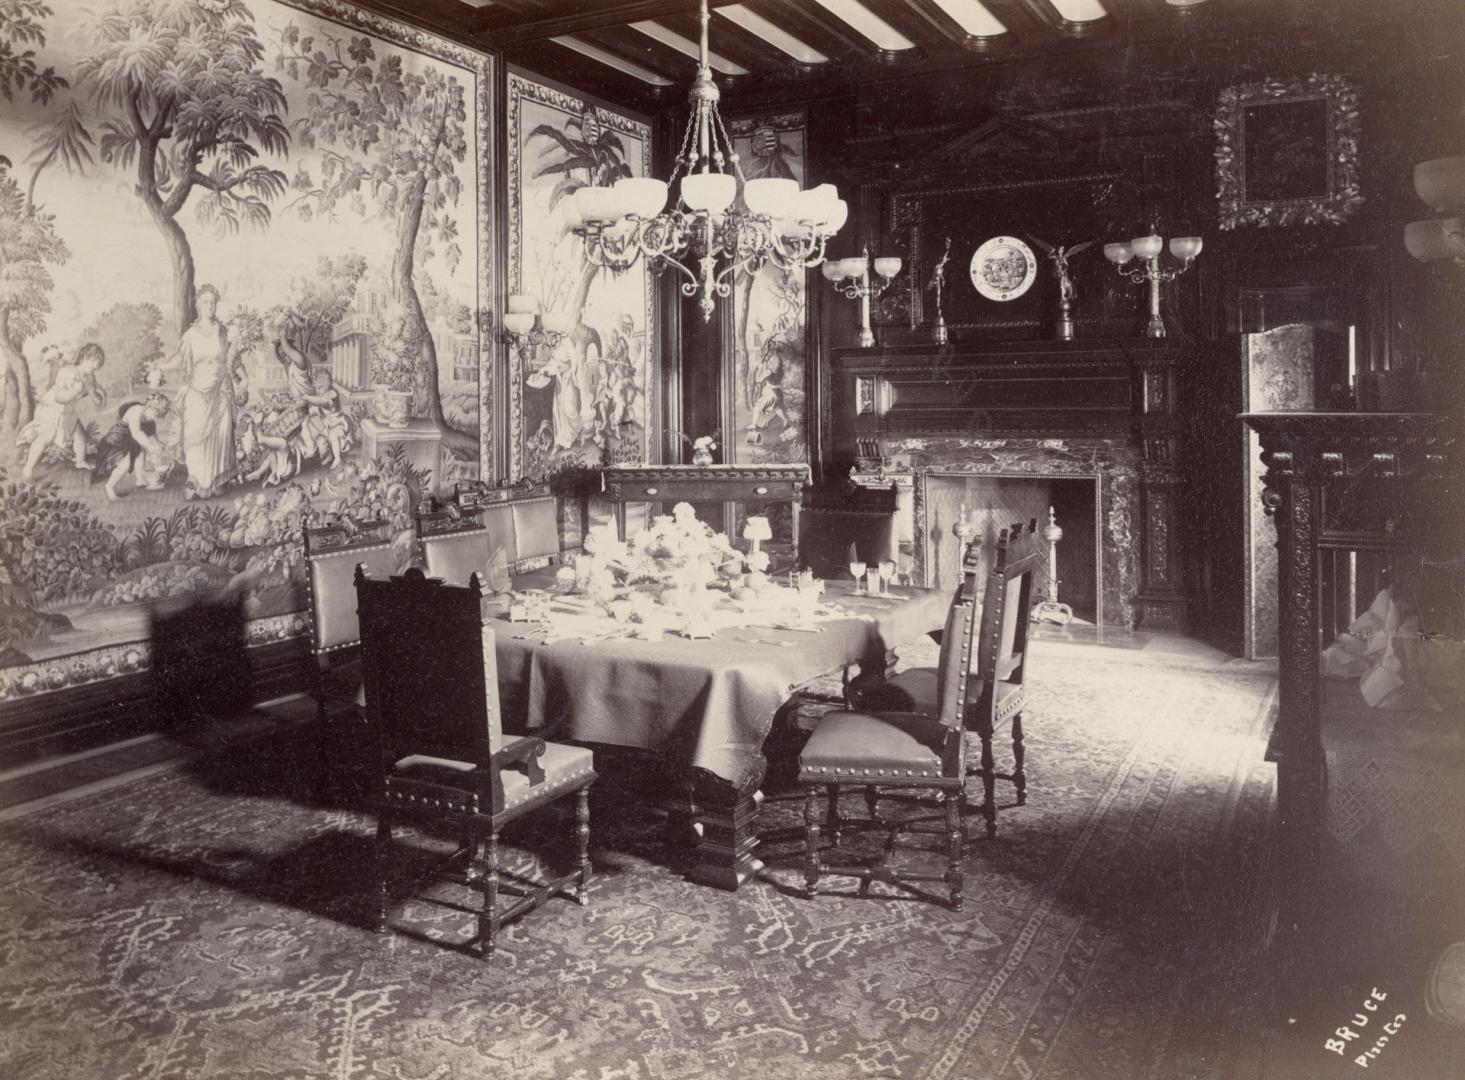 Image shows an interior of the dining room.